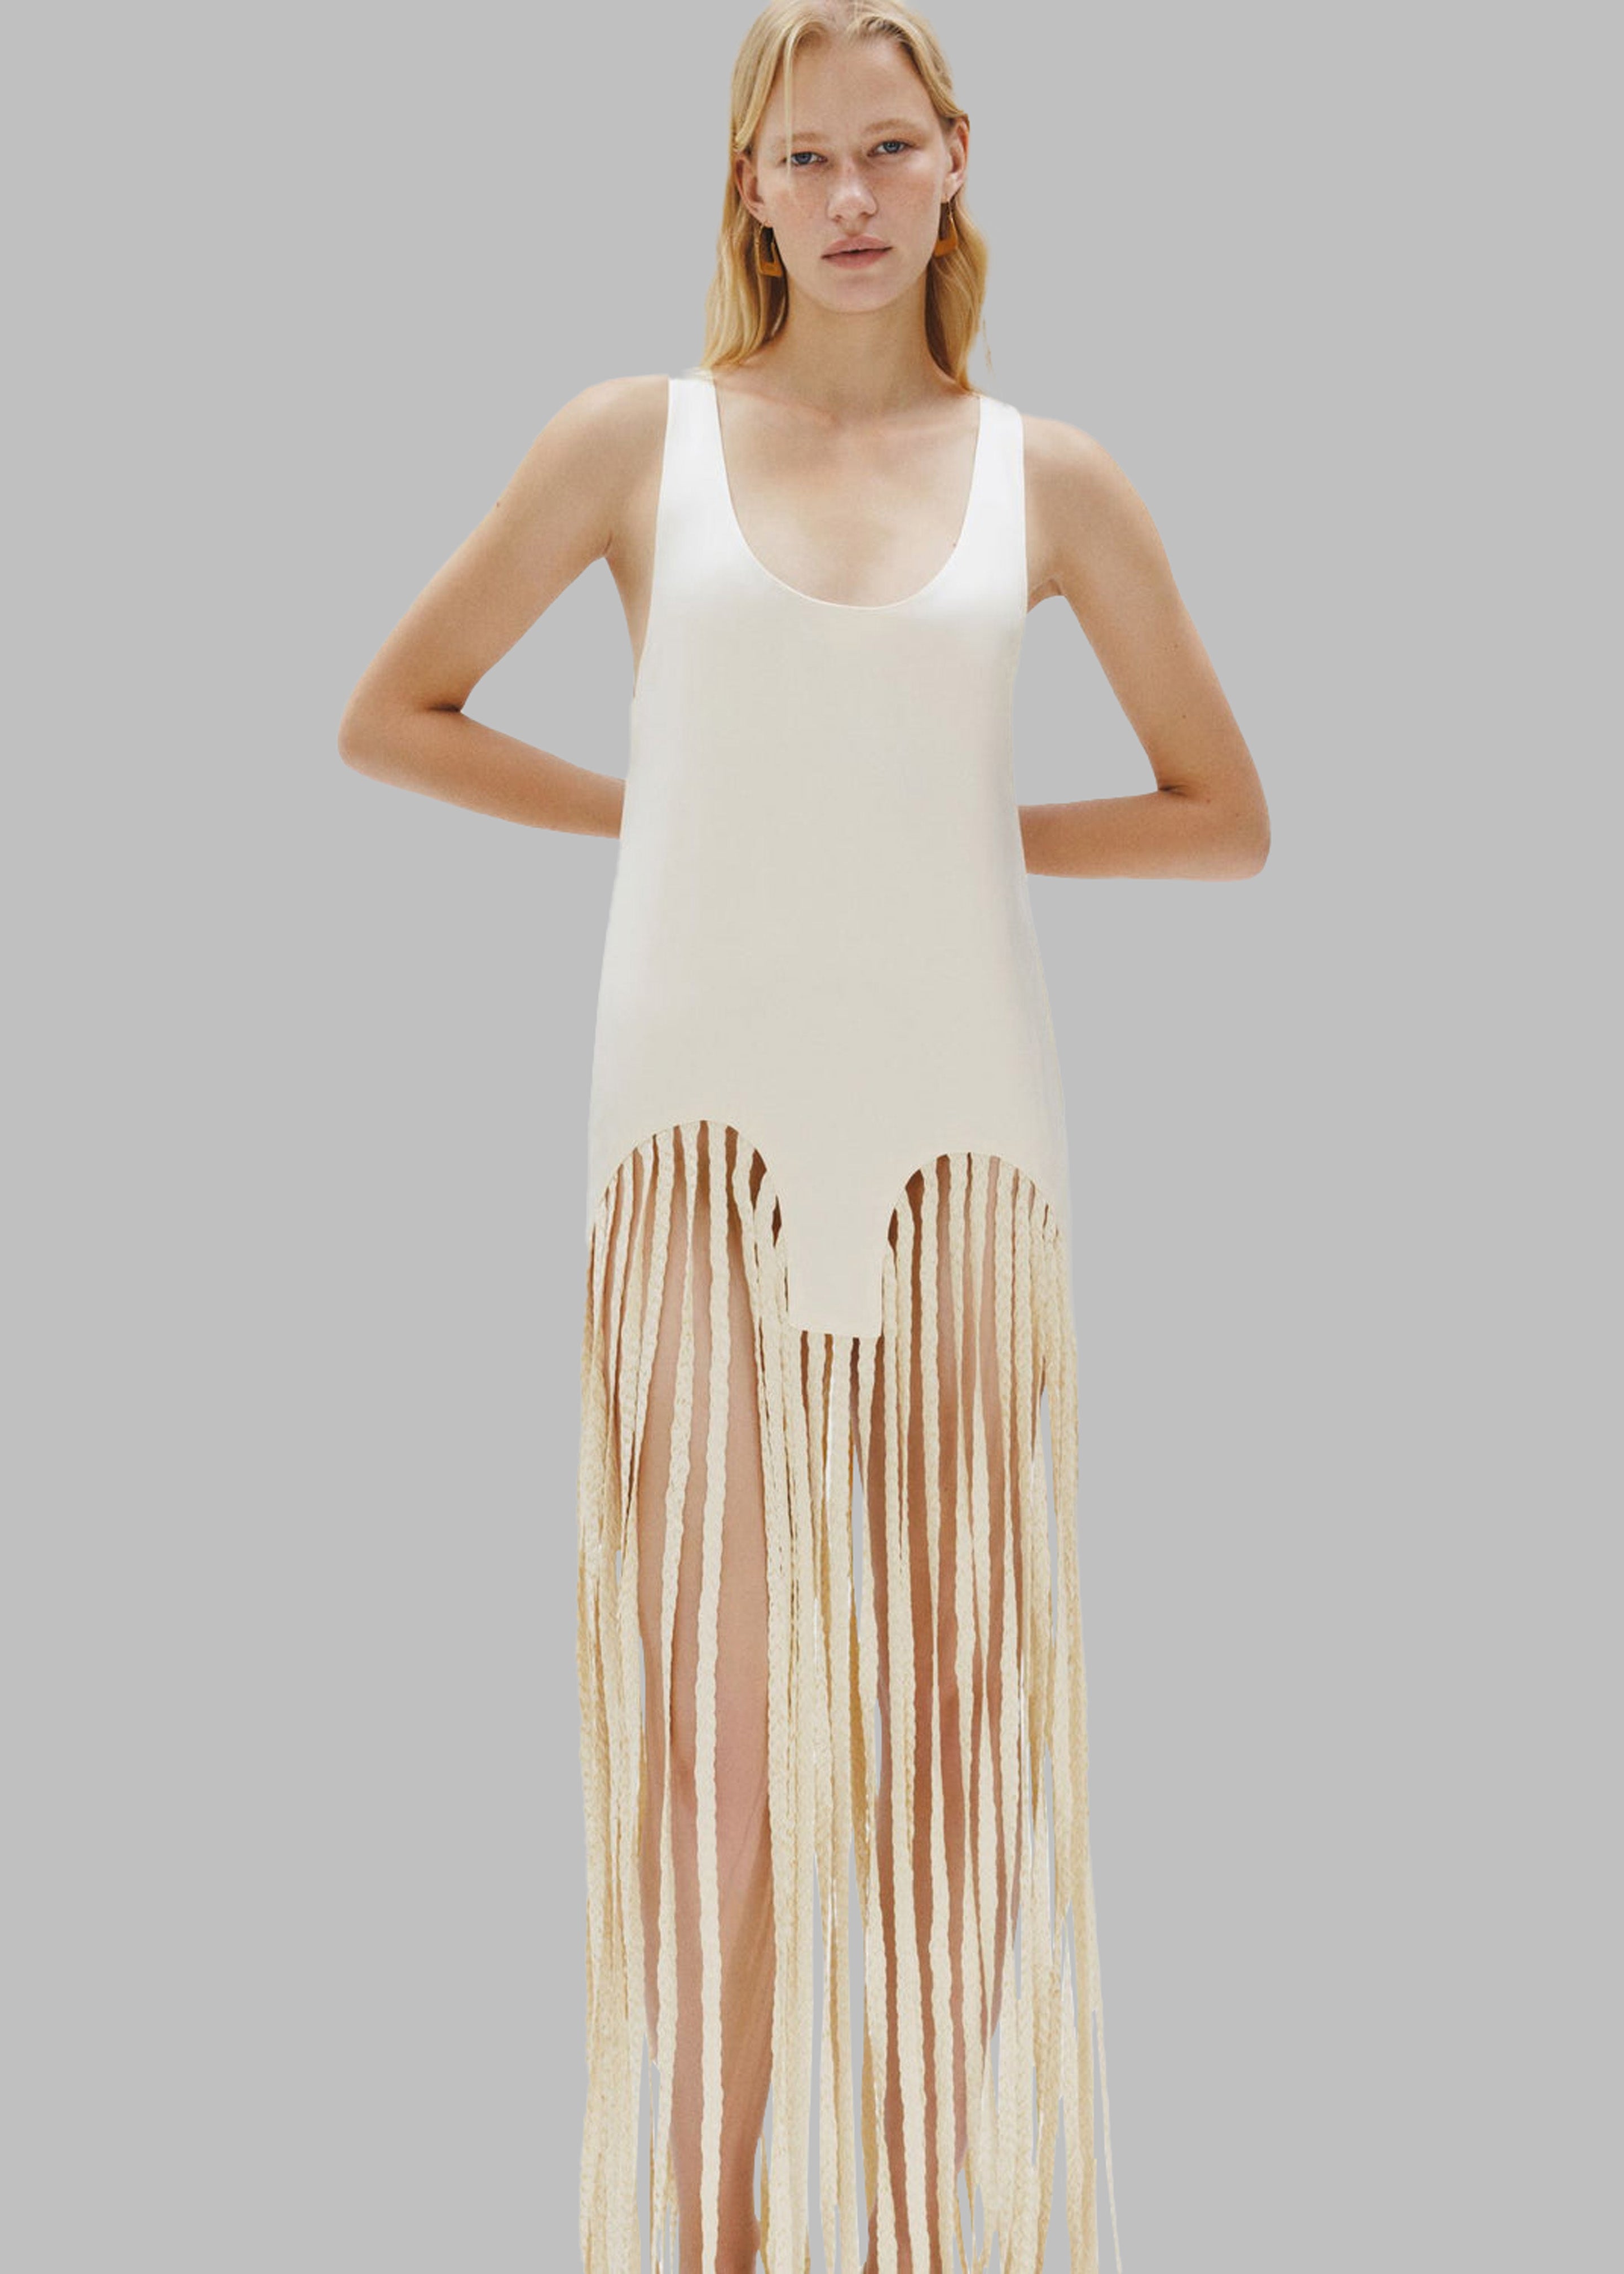 Bevza Long Spikelet Dress - Champagne - 3